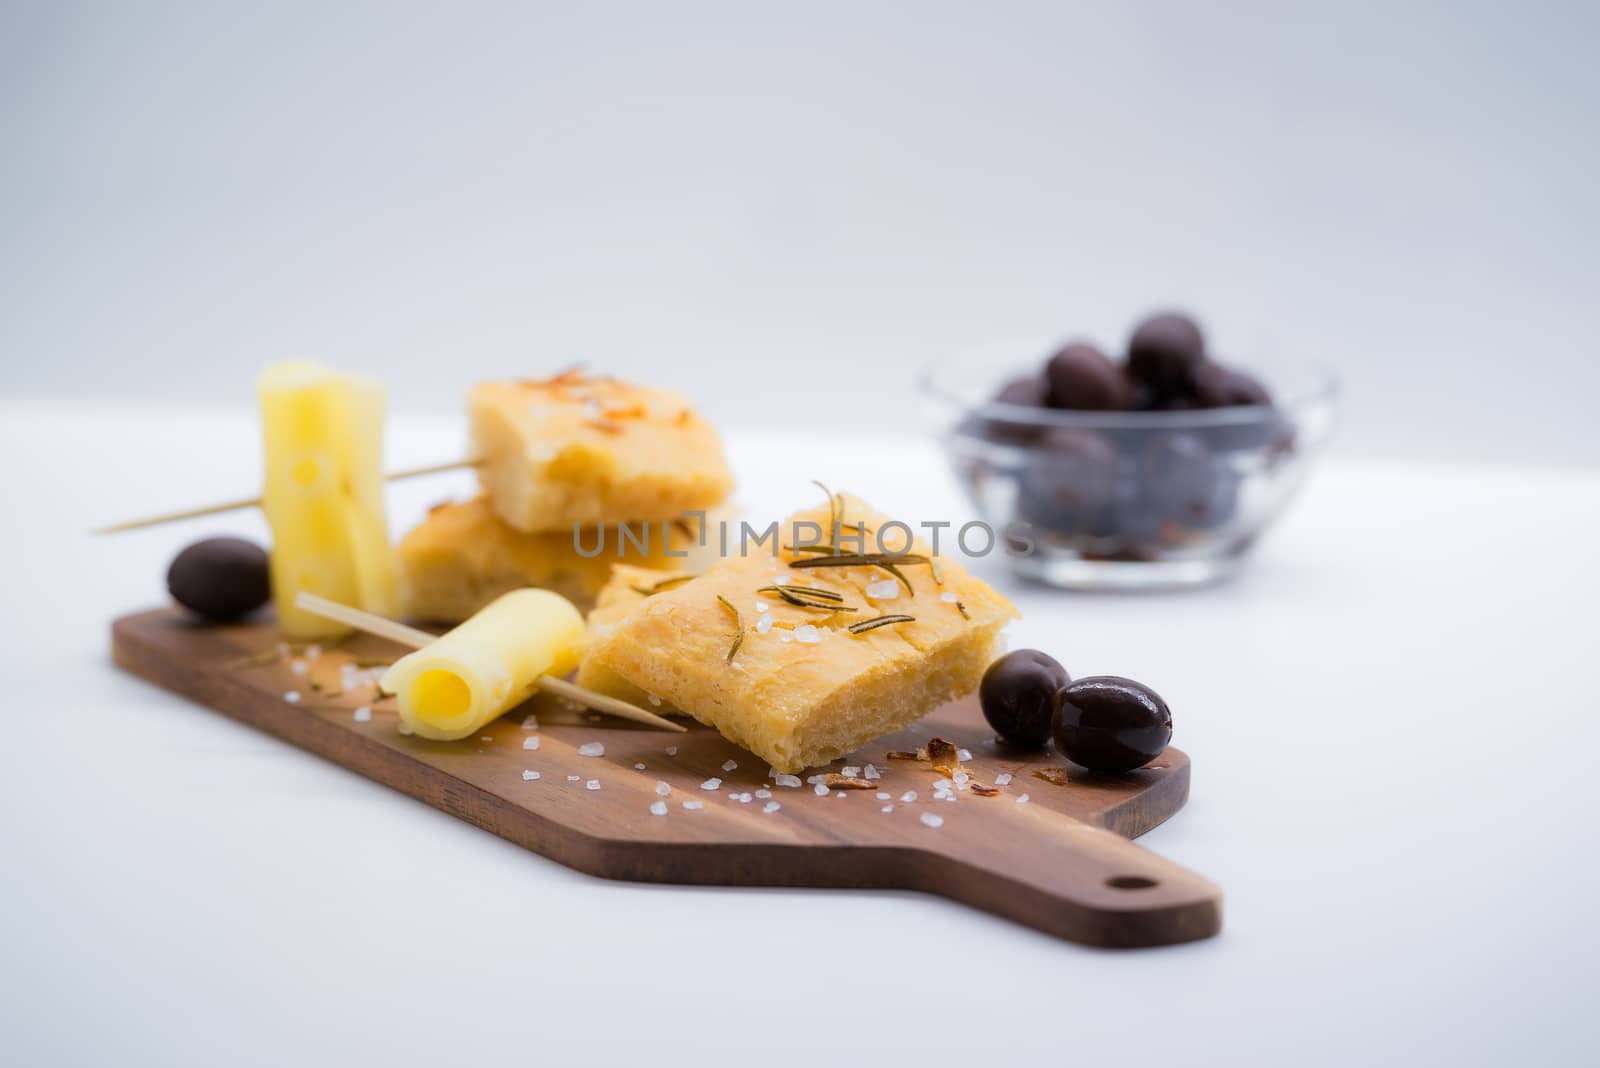 Italian focaccia with rosemary, olives and cheese over a cutting board